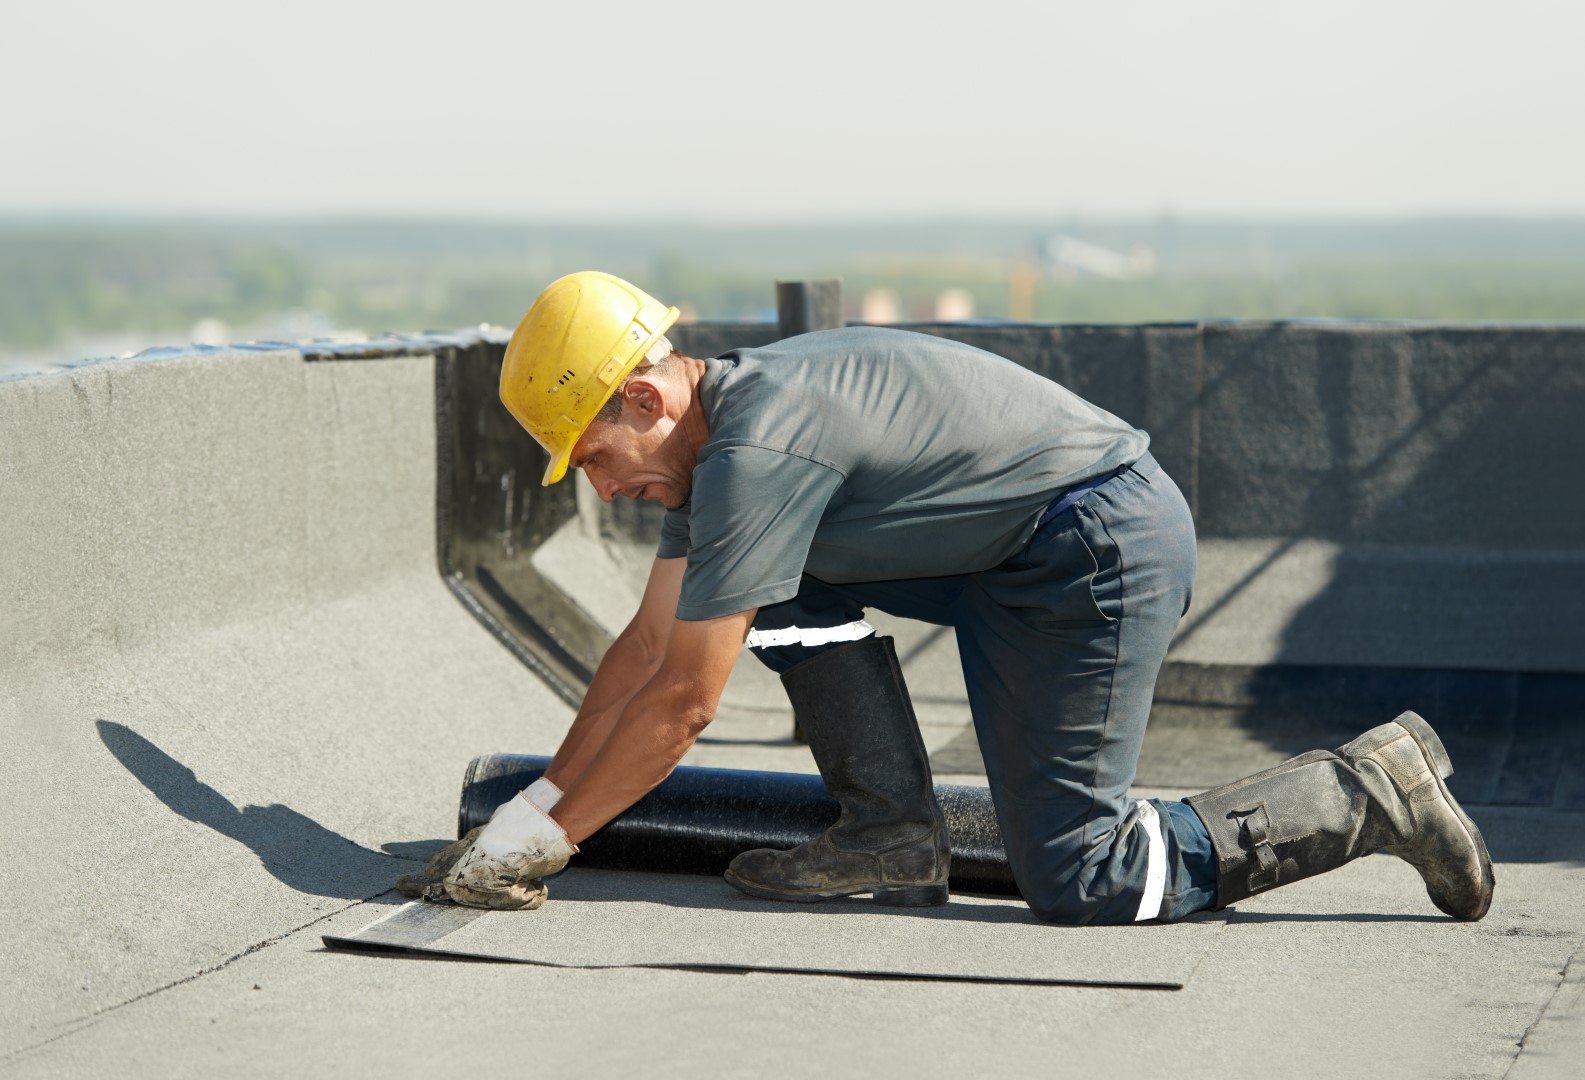 Image depicts a roofer repairing a roof.